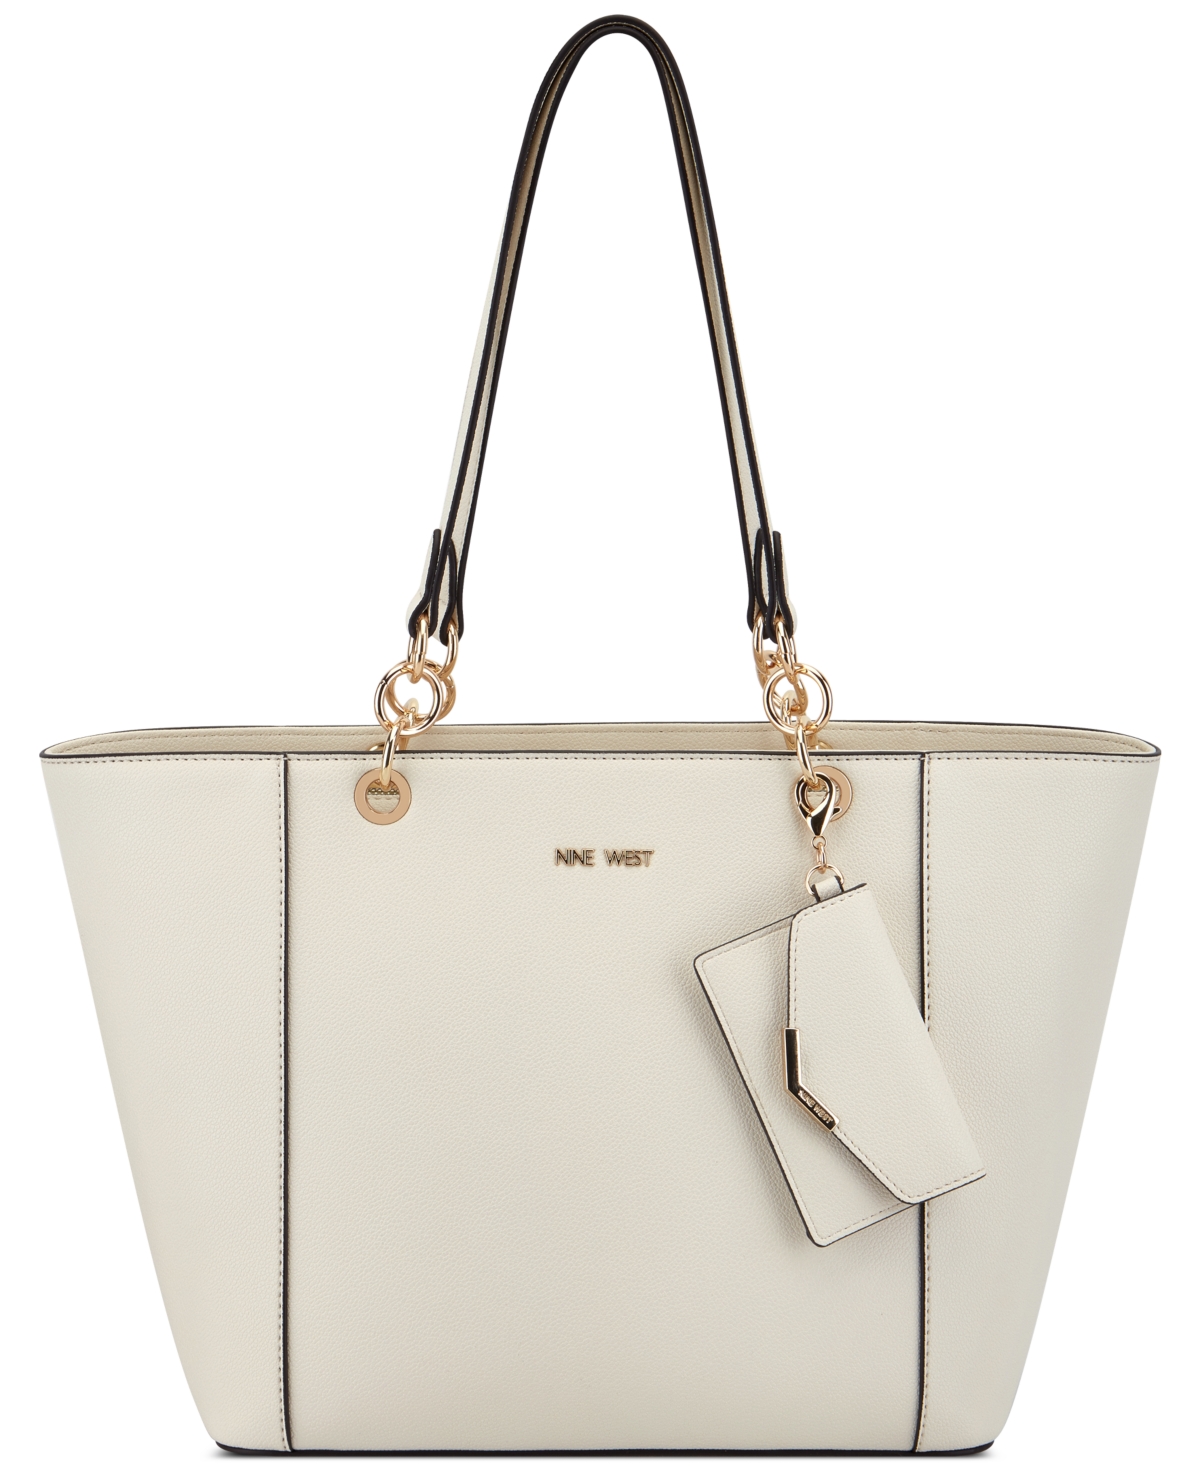 Nine West Basil Extra Large Tote In Chic Cream